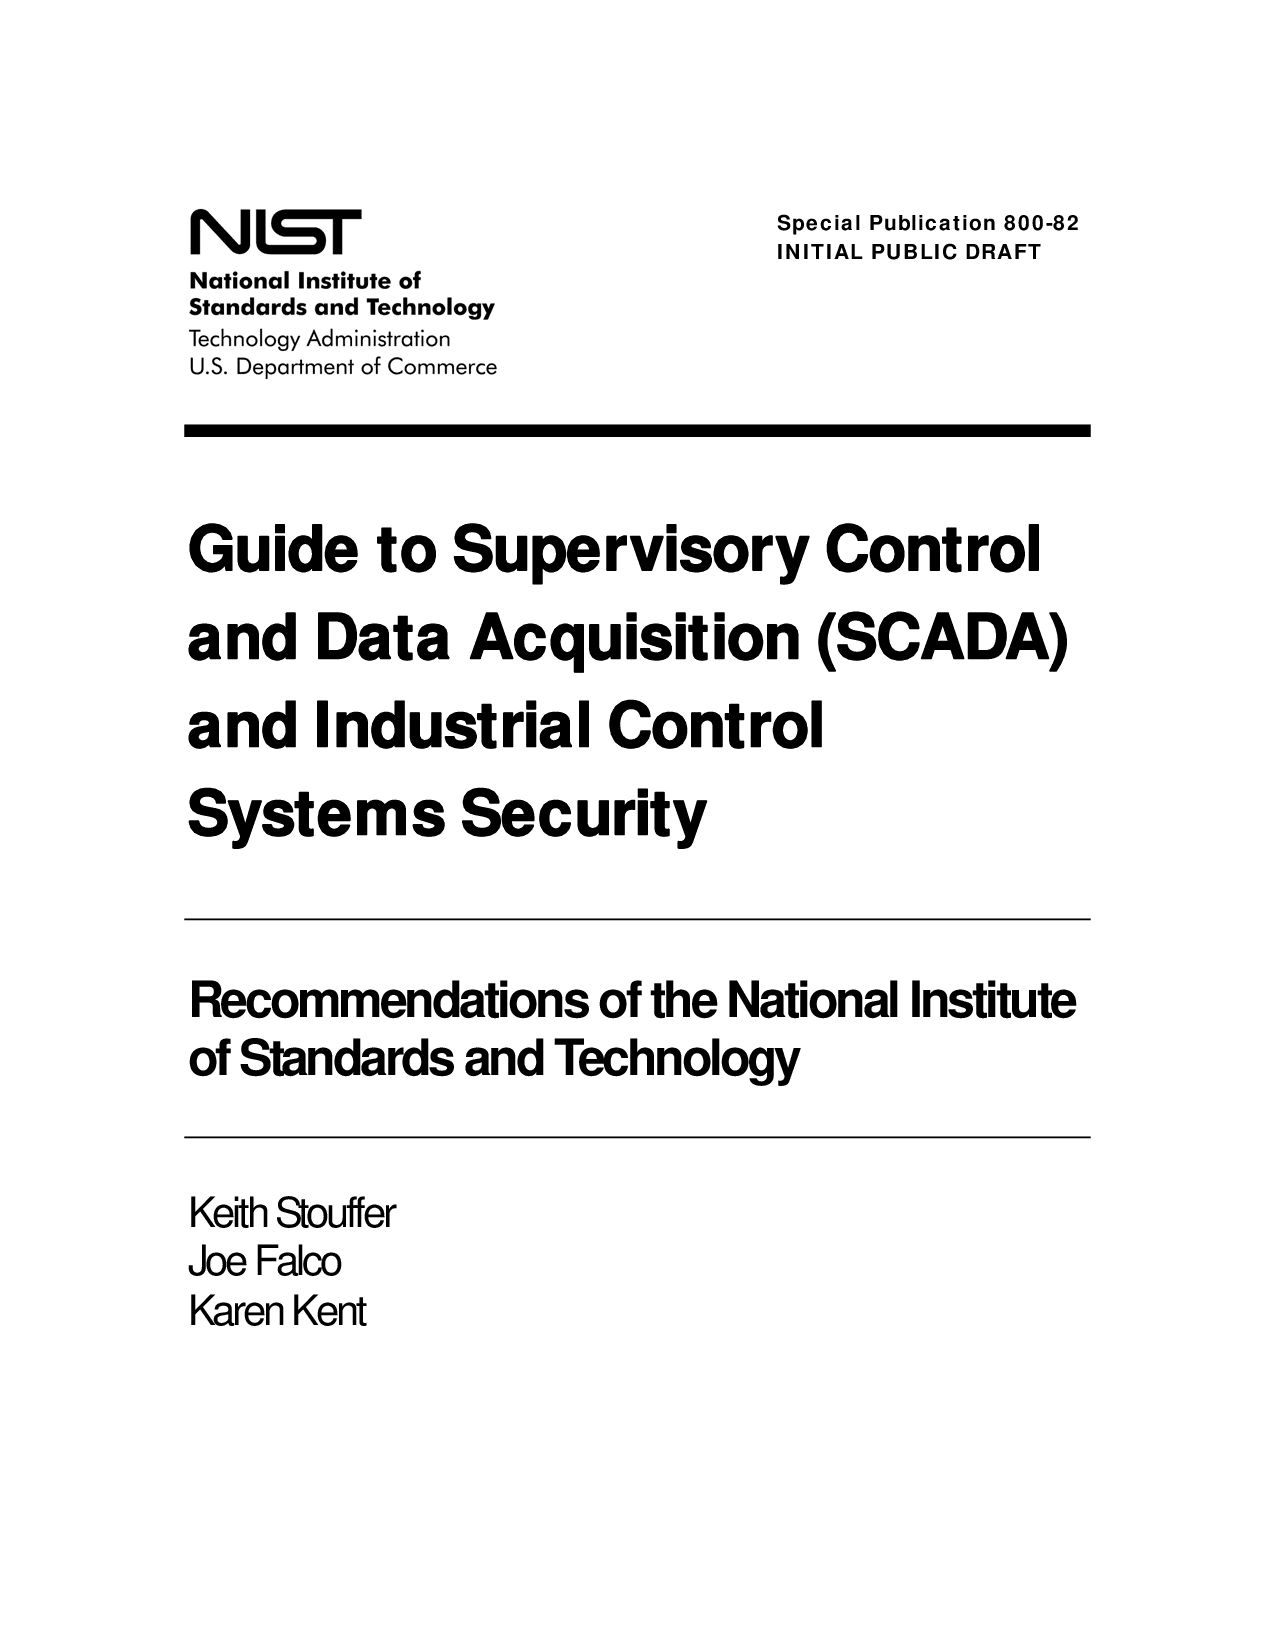 Guide Scada And Industrial Control Systems Security for sizing 1275 X 1650